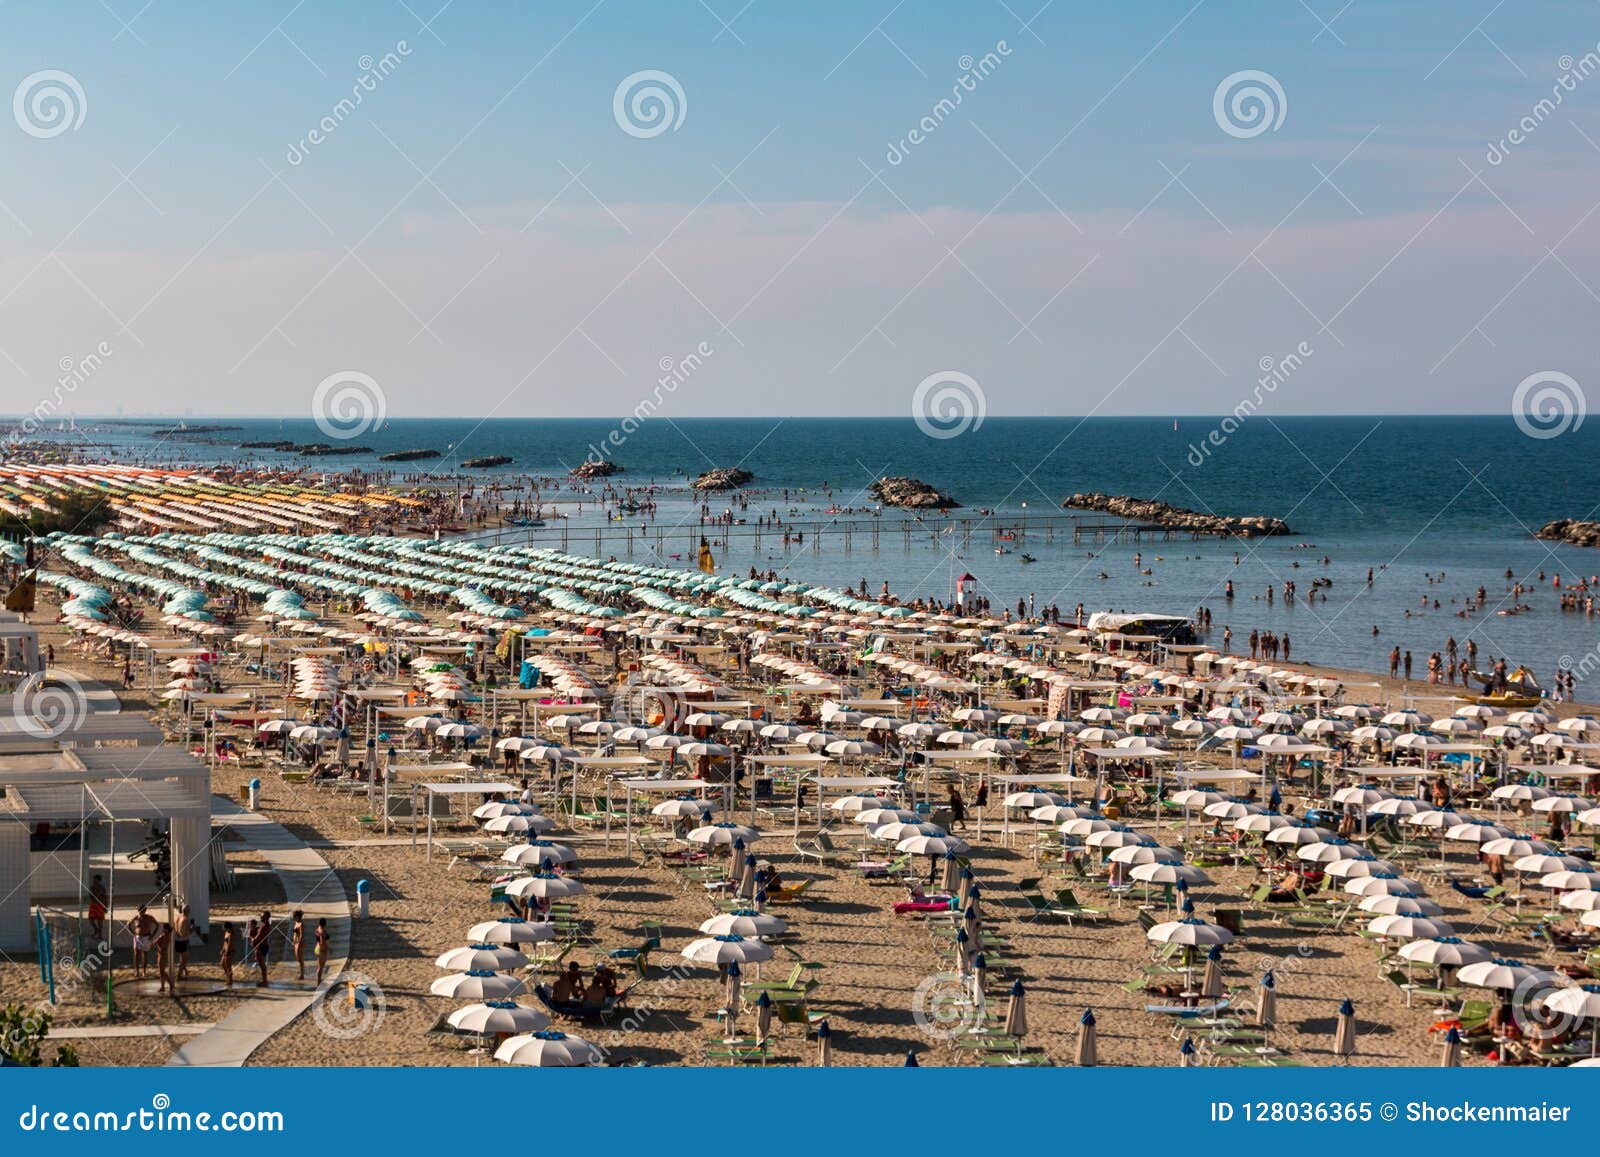 beach section in torre pedrera at rimini in italy